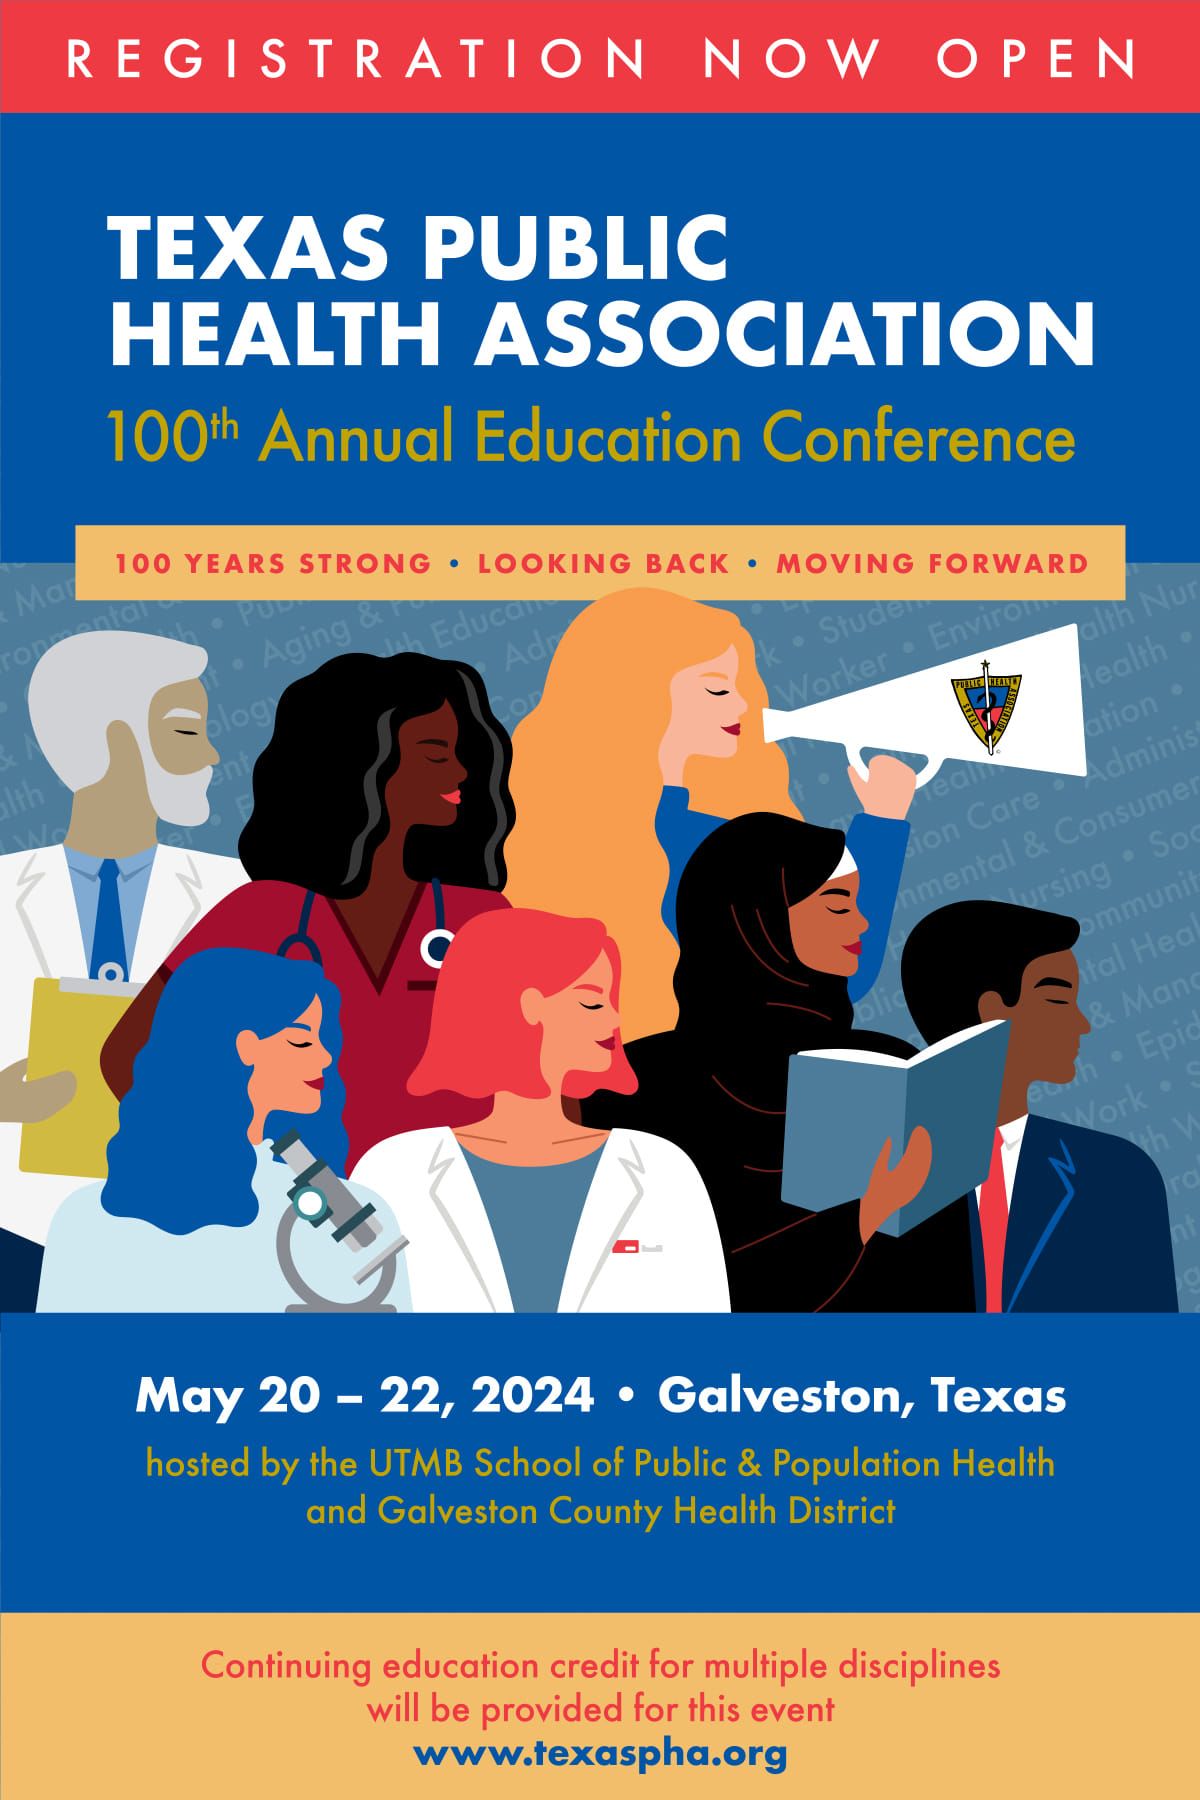 Texas Public Health Association Annual Education Conference May 20-22, 2024 